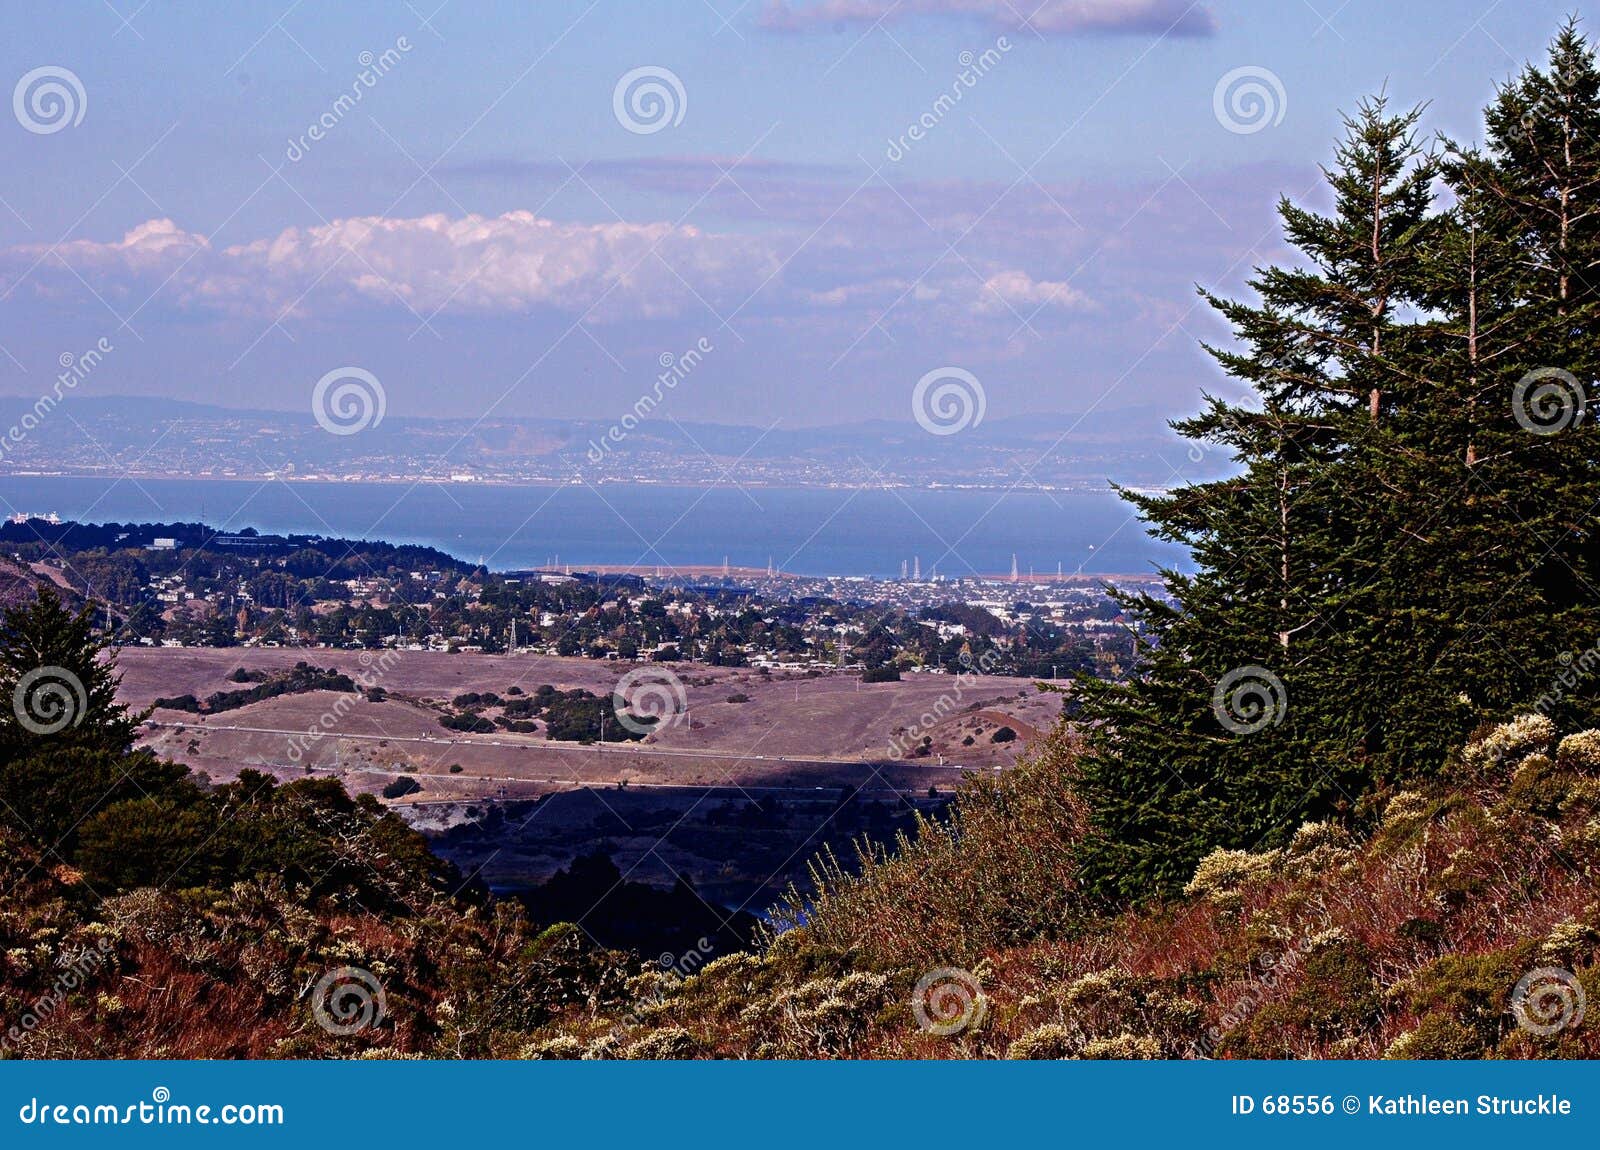 Scenic view of San Francisco city and bay viewed from countryside ...